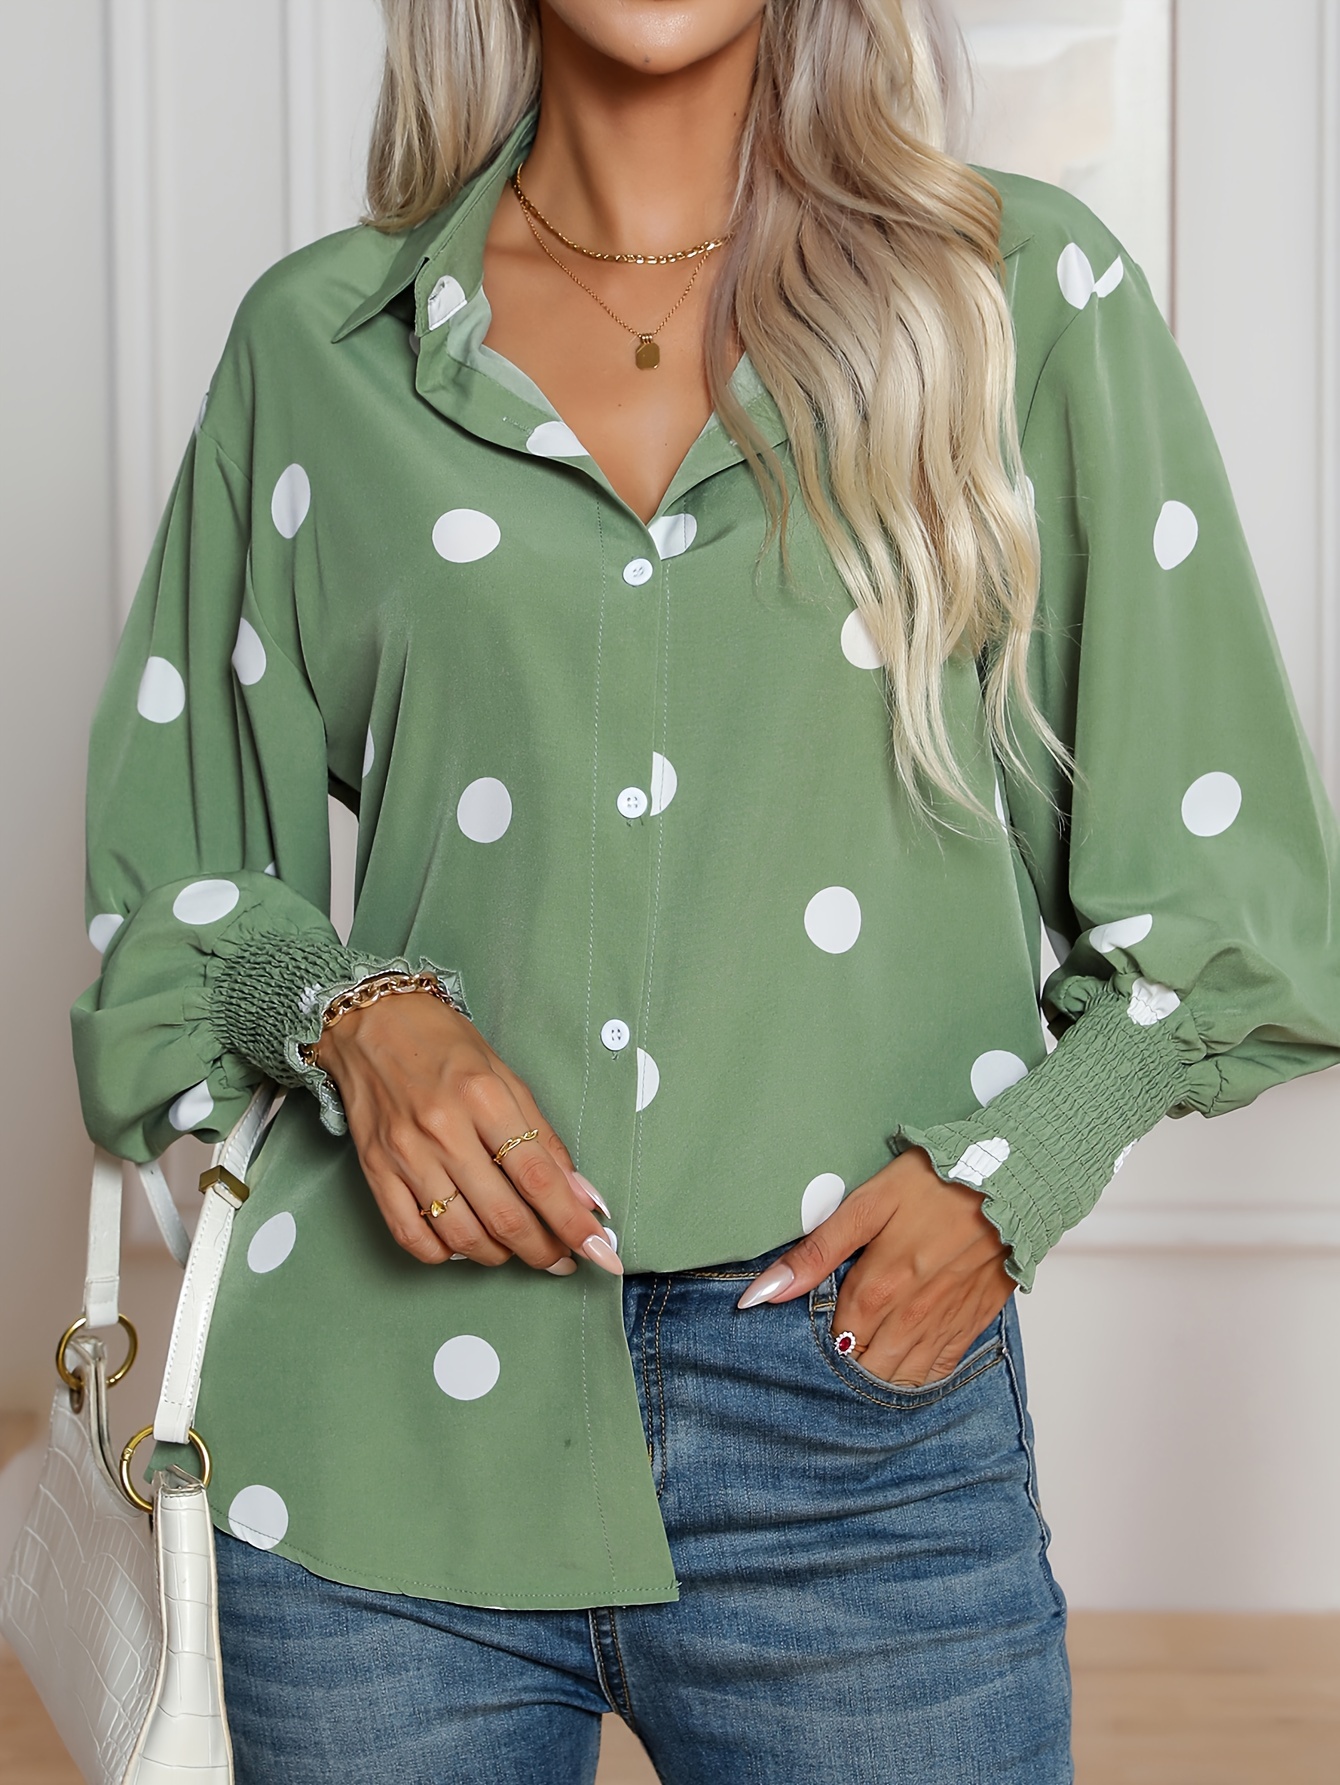 Right on Time Polka Dot Top